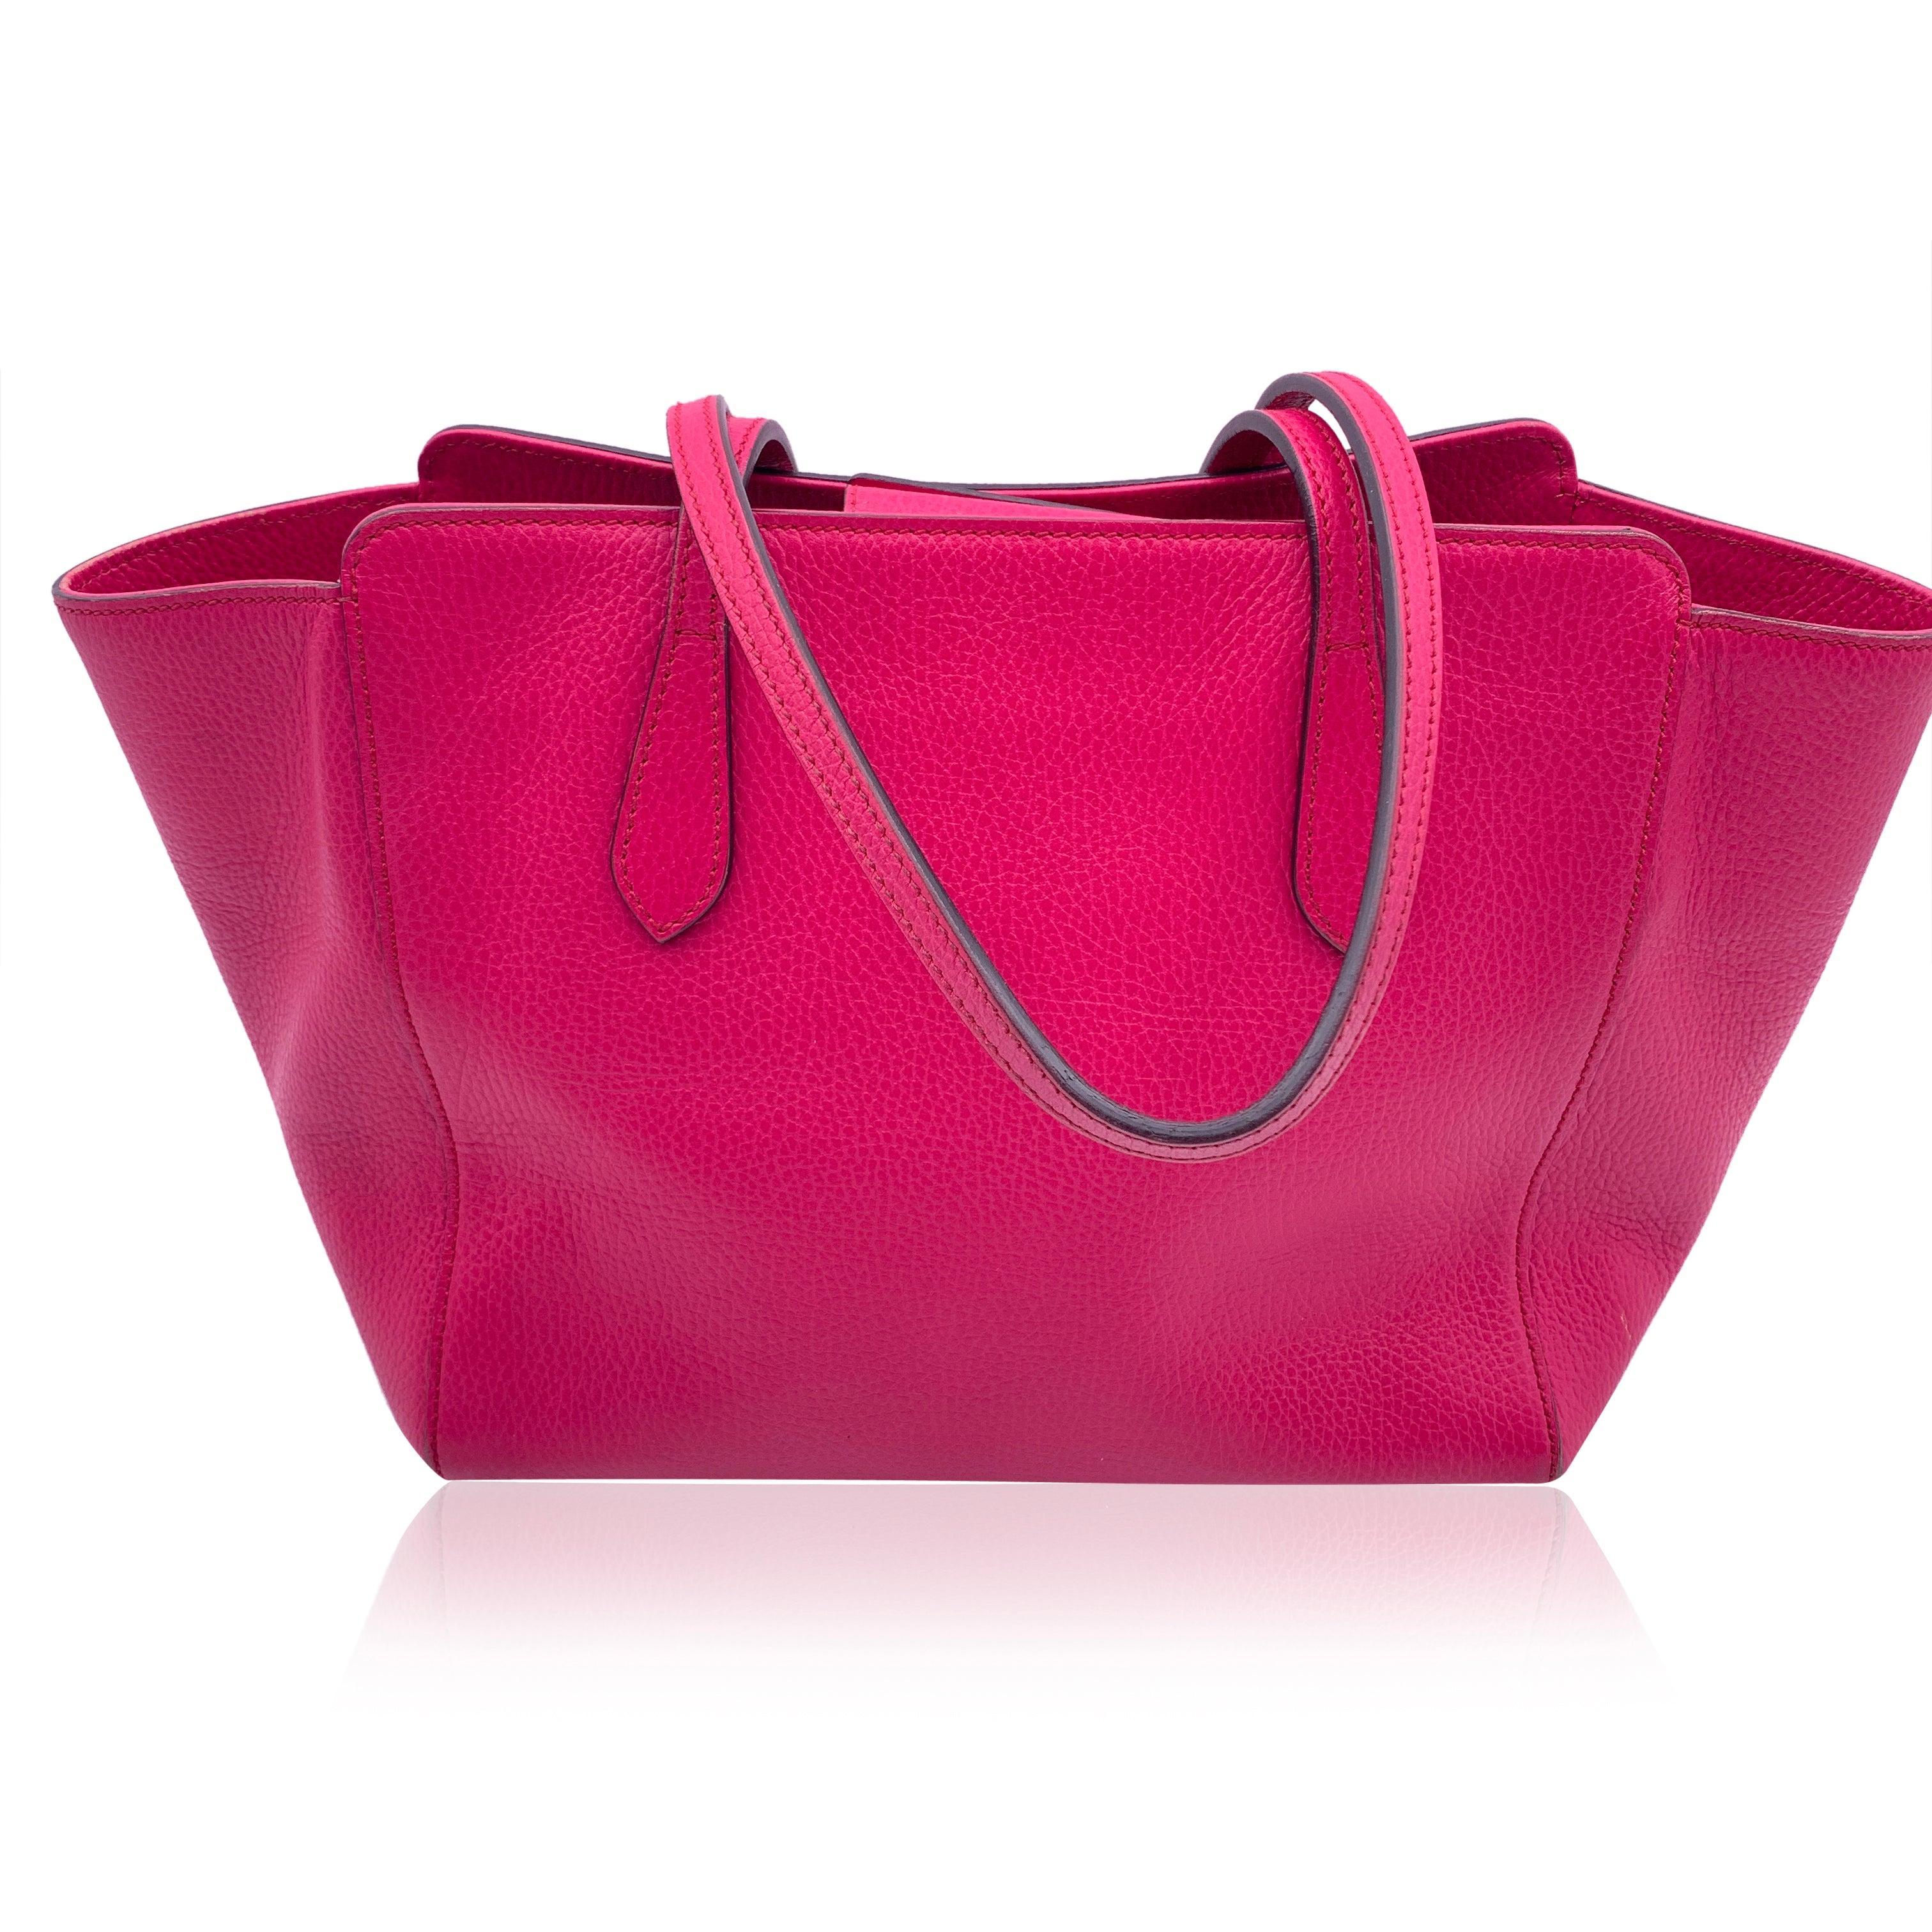 Gucci Fuchsia Pink Leather Swing Medium Handbag Tote Bag In Good Condition For Sale In Rome, Rome